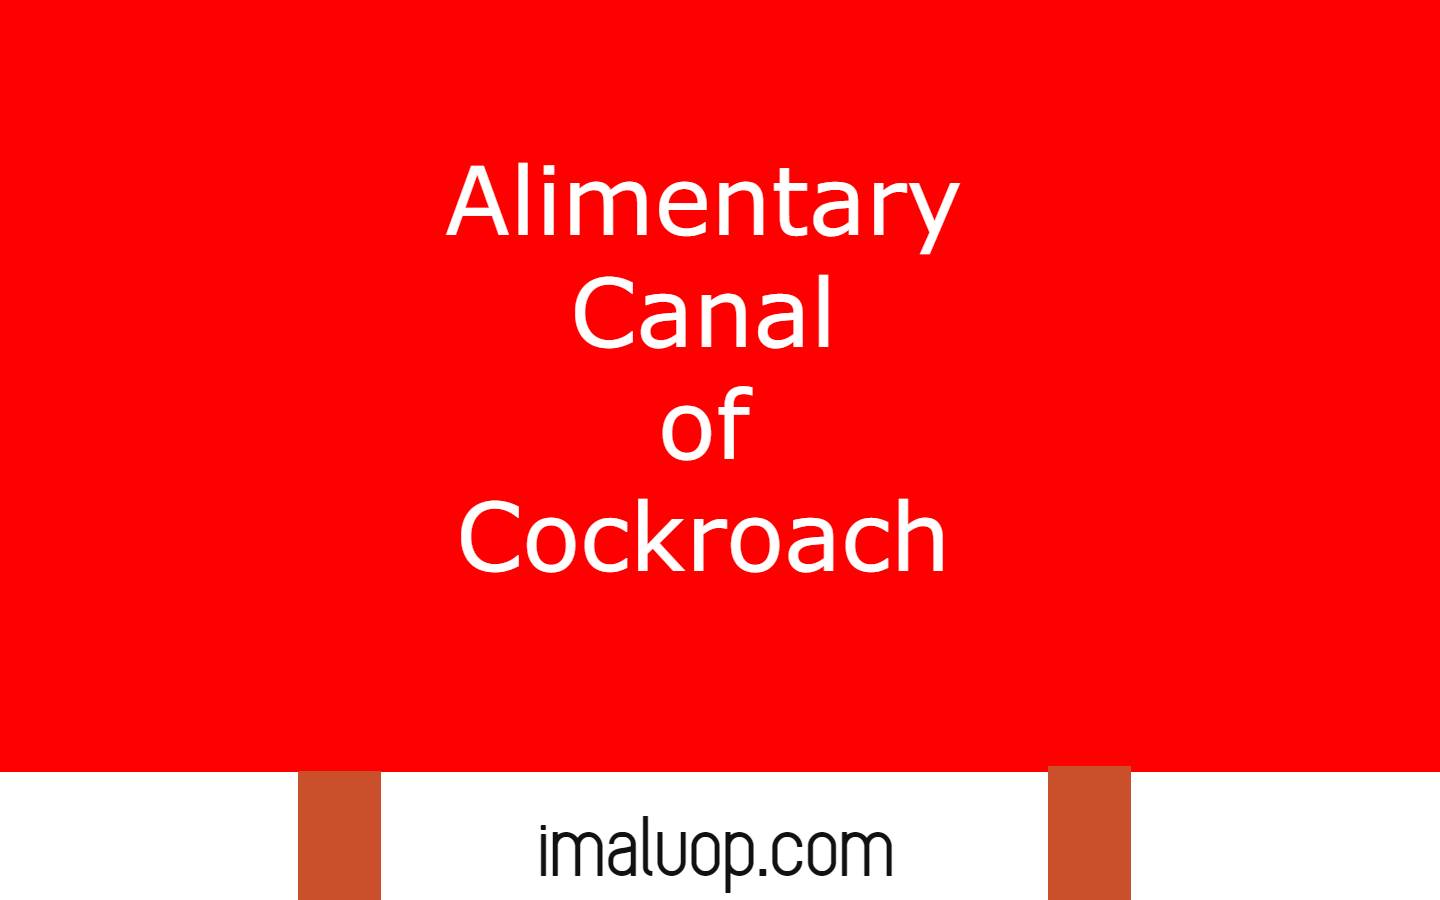 Alimentary Canal of Cockroach